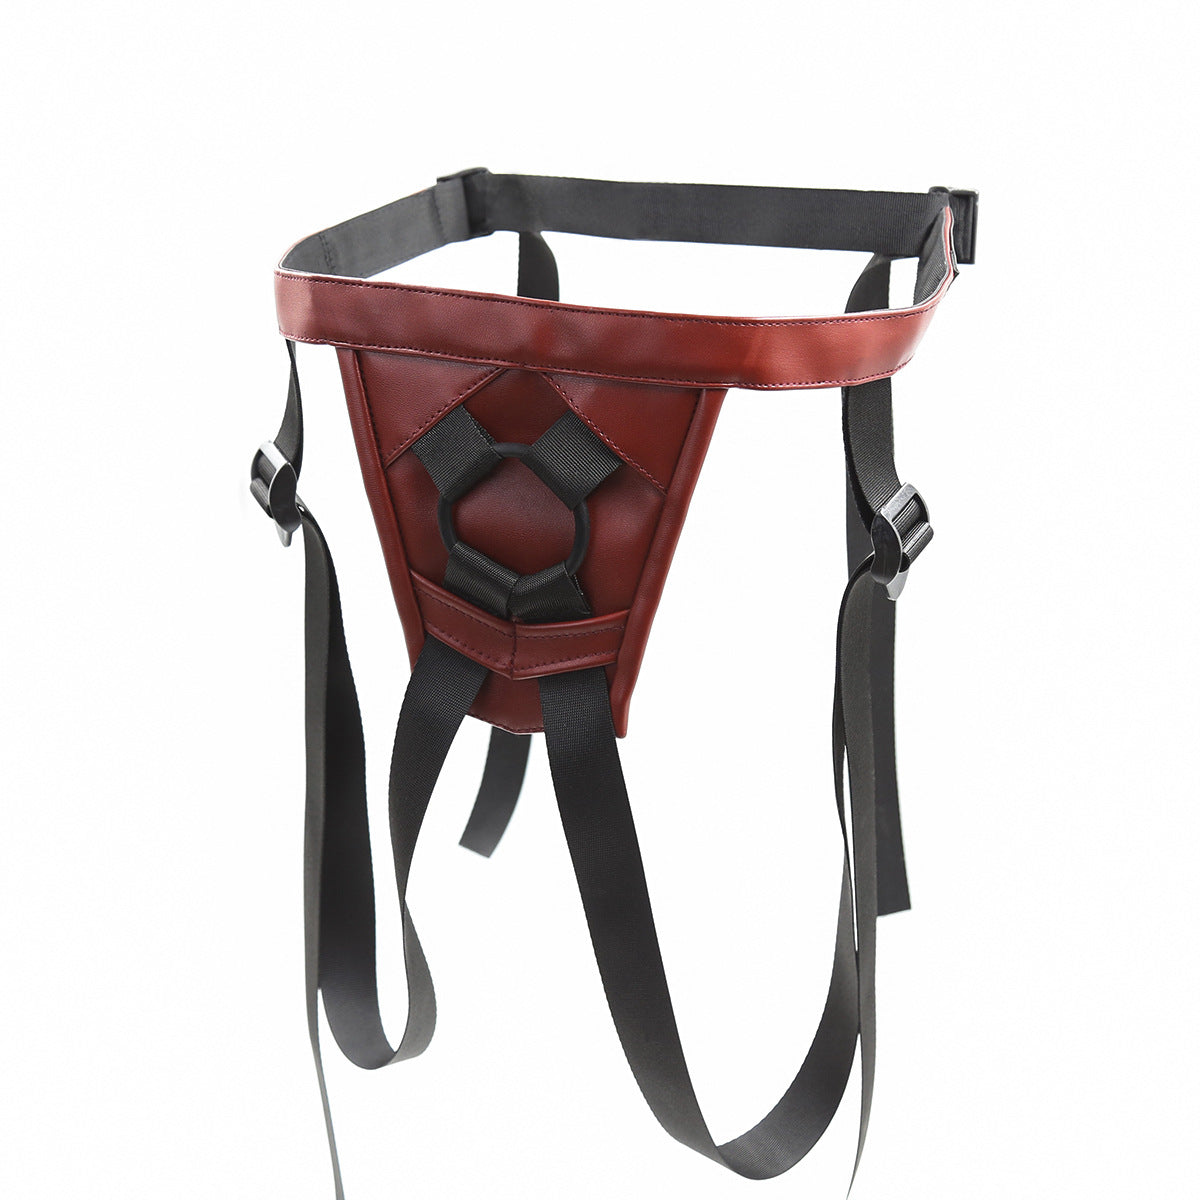 Red Leather Adjustable Harness for Strap on